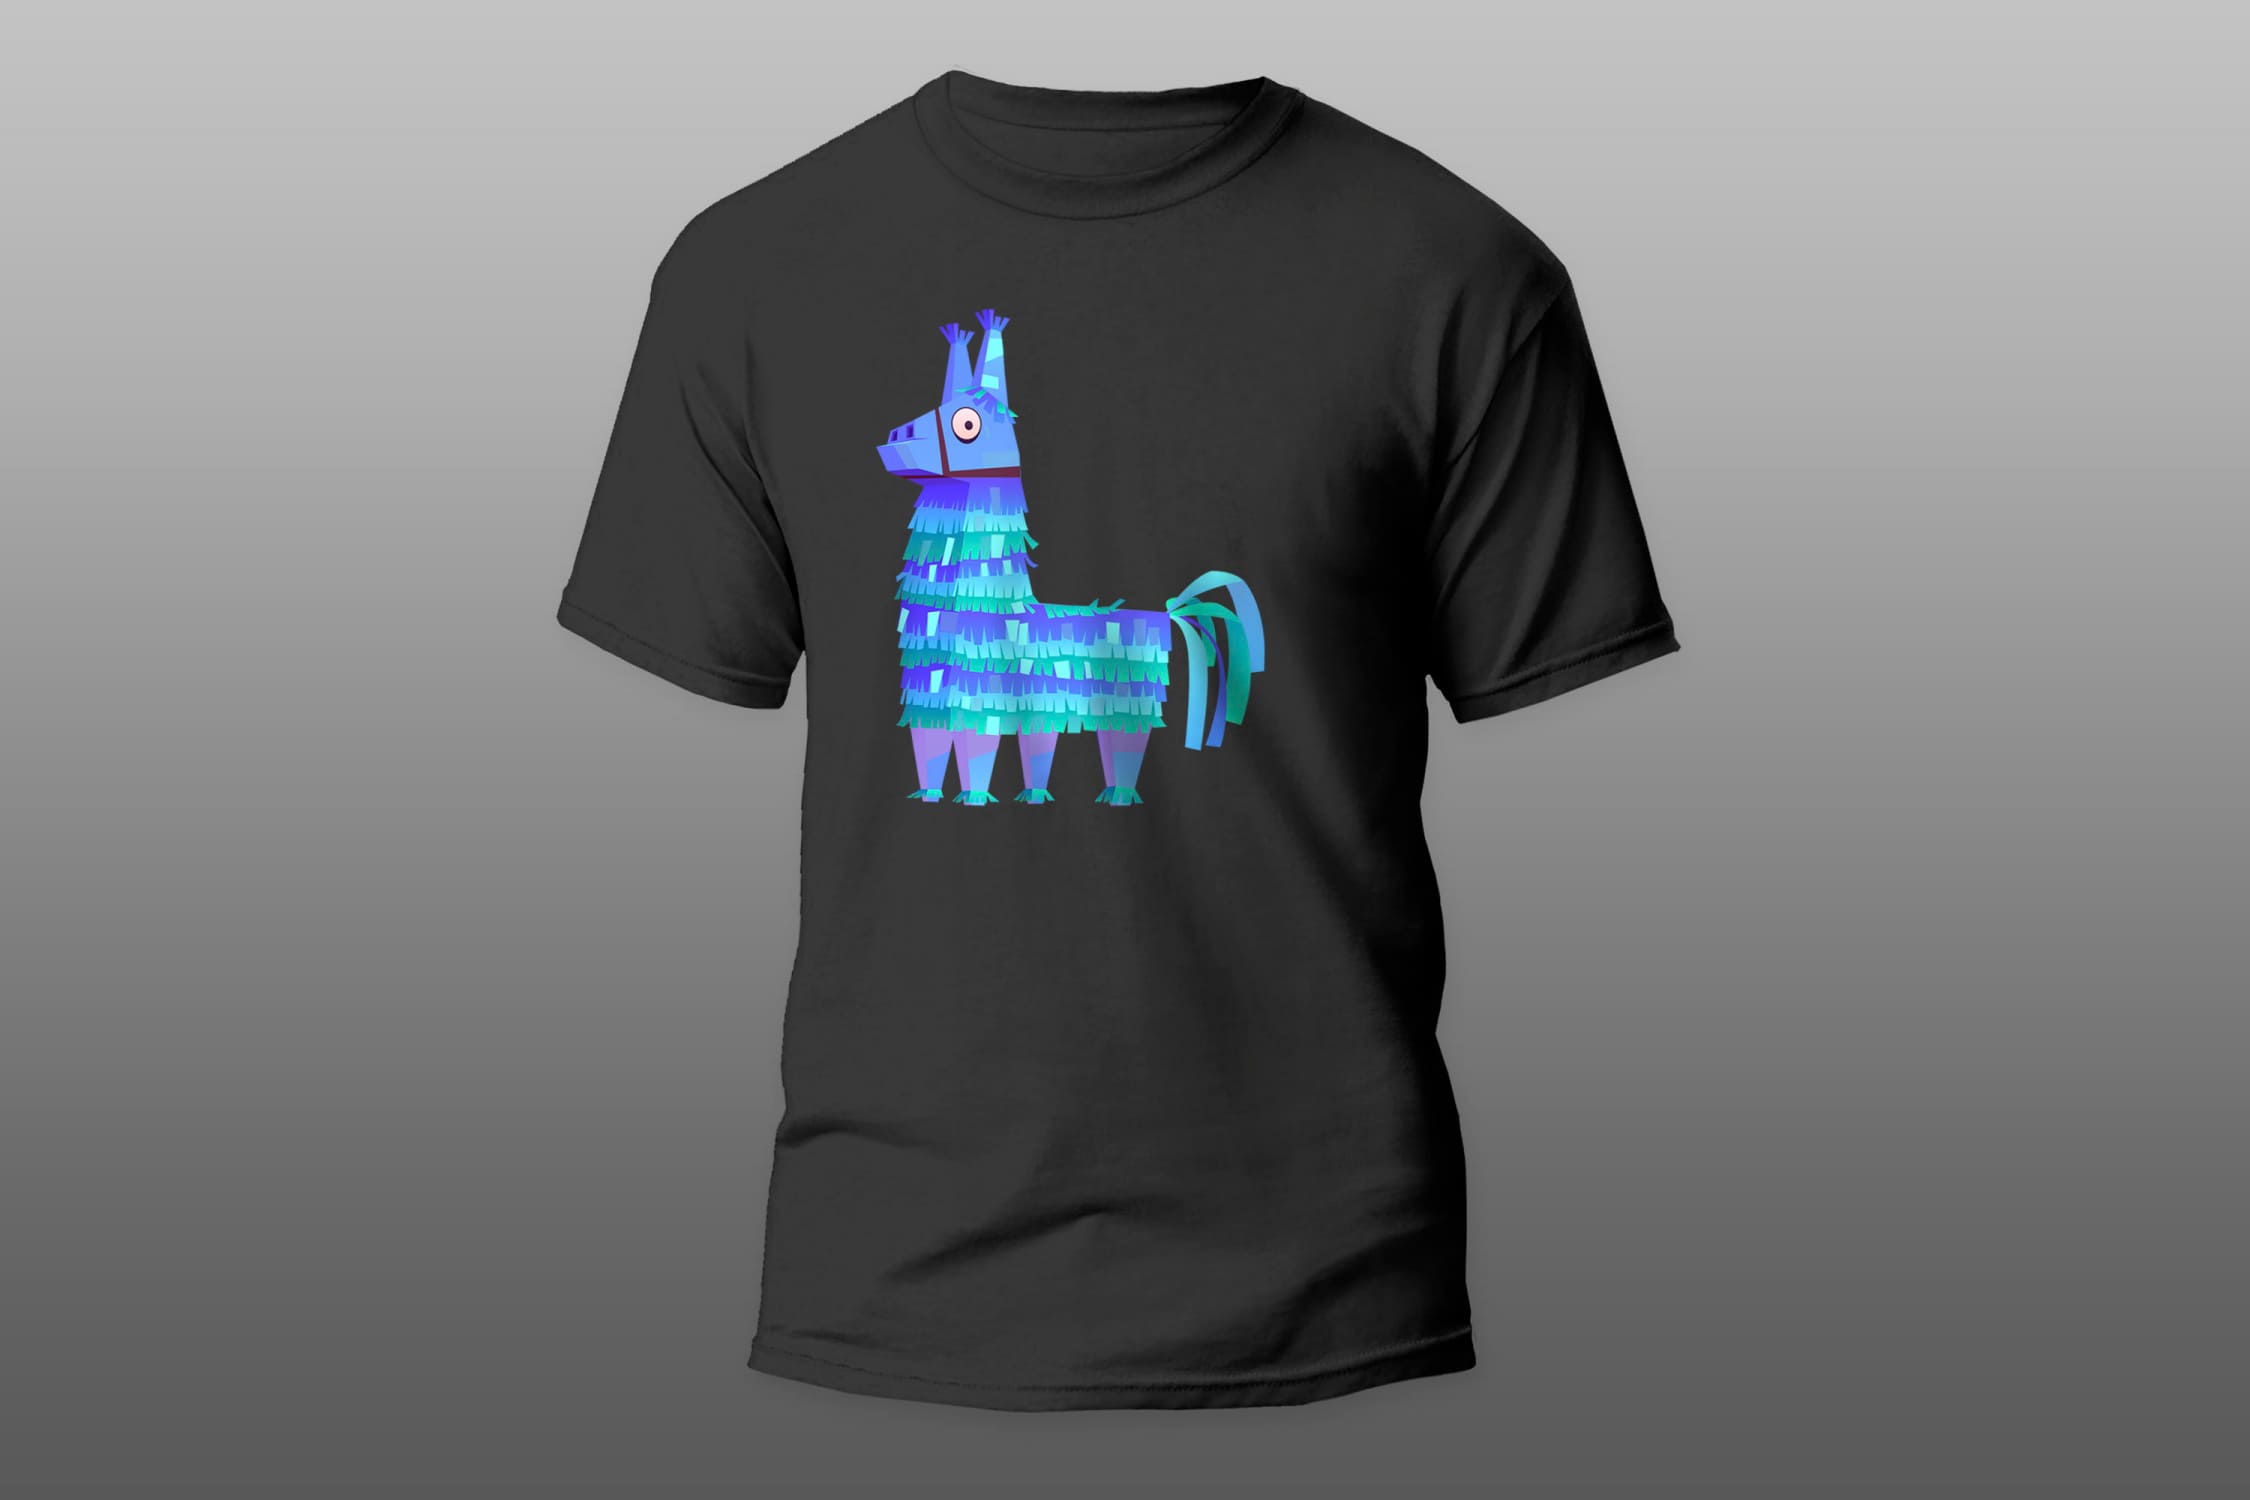 Black t-shirt with a blue tones llama on a gray gradient background.